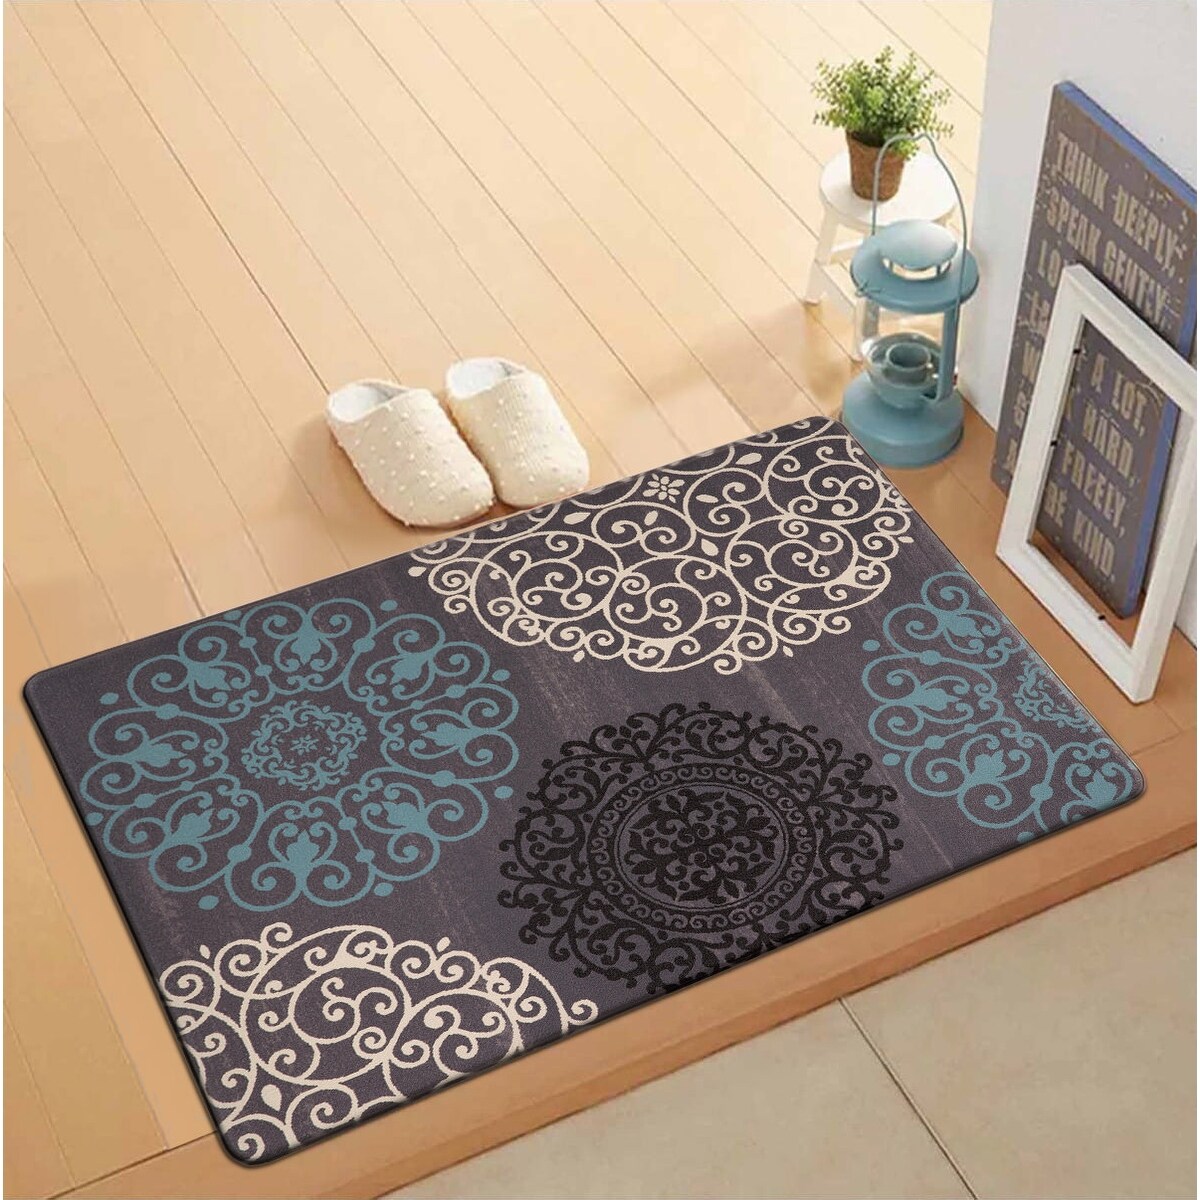 https://ak1.ostkcdn.com/images/products/is/images/direct/fa928446aca18bd2b9eea962feea1f76c81a5a21/Contemporary-Modern-Floral-Anti-Fatigue-Standing-Mat.jpg